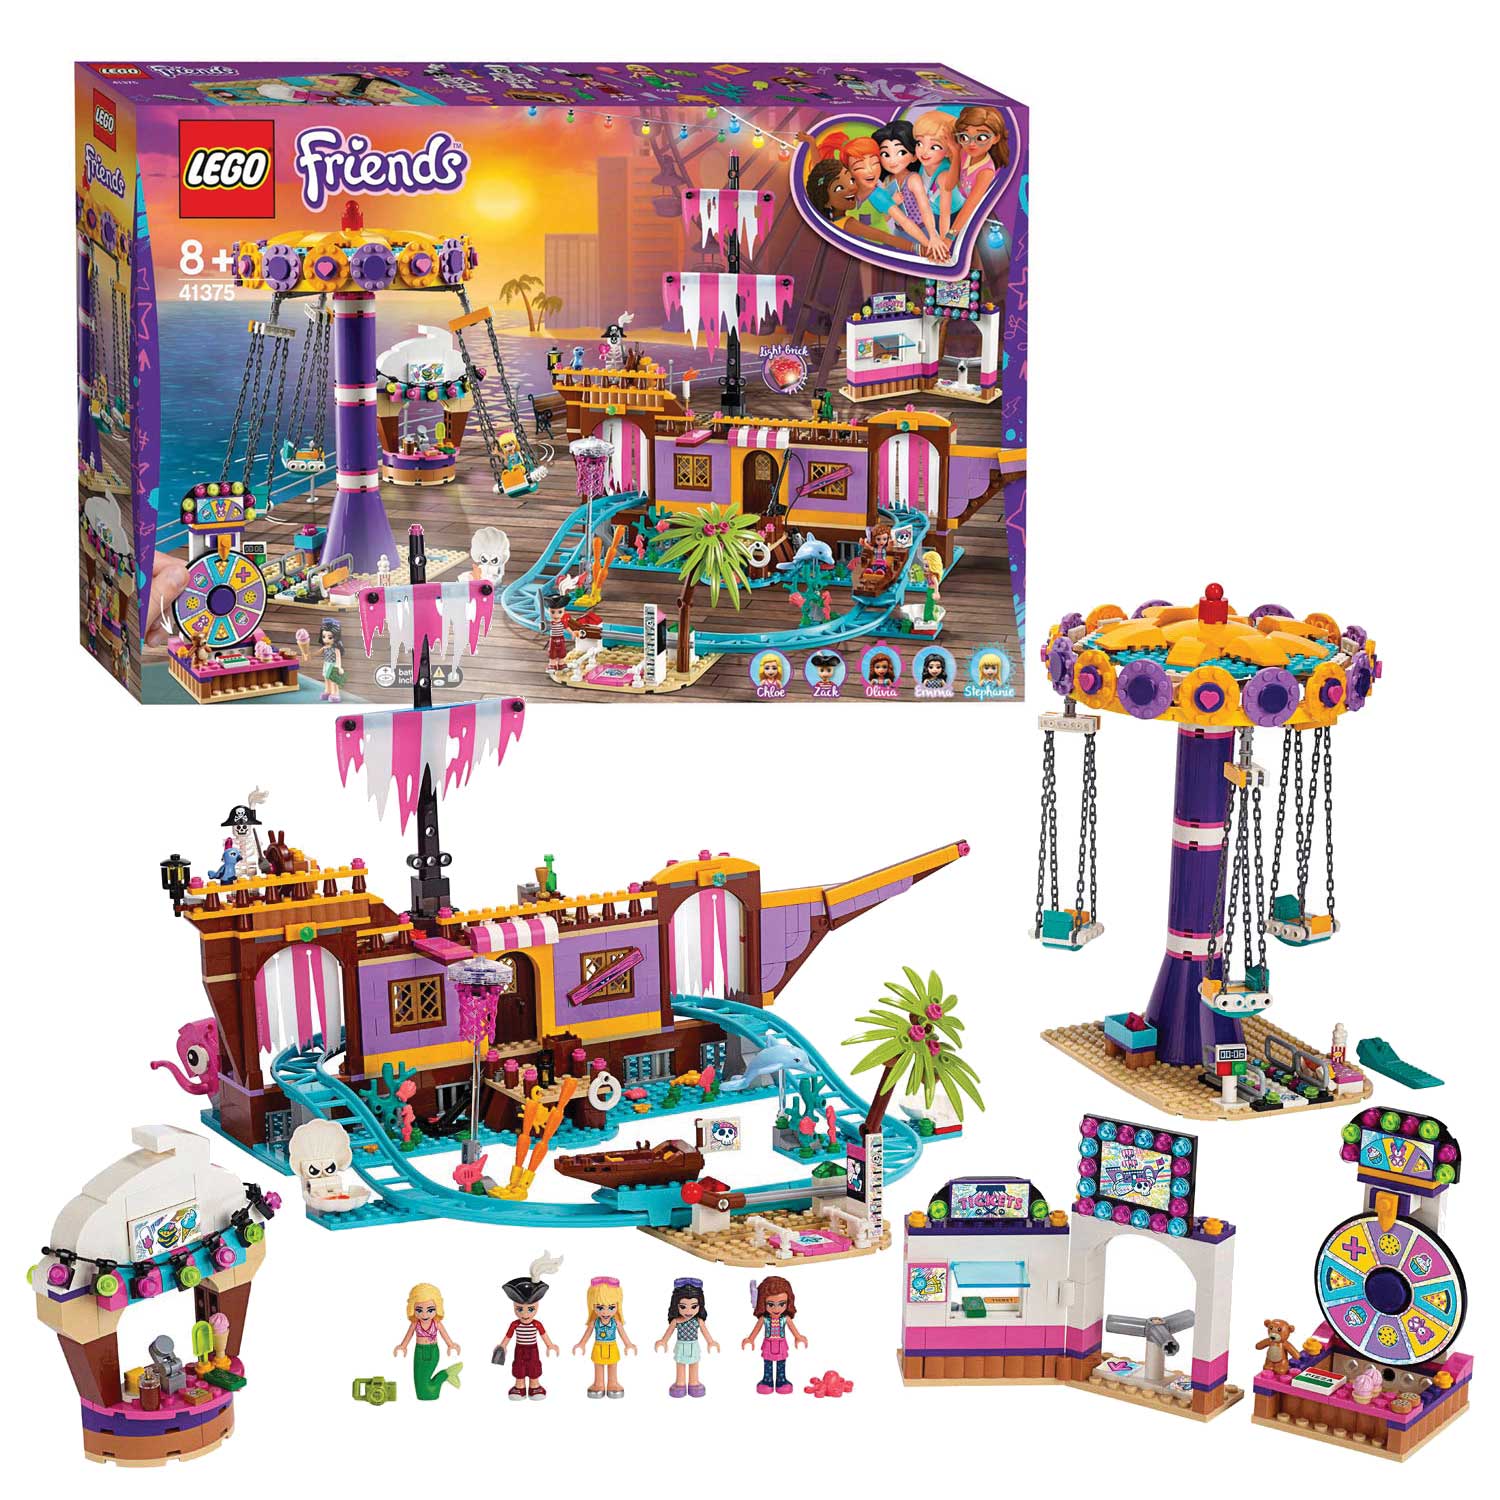 Friends 41375 Pier with fairground attractions | Thimble Toys